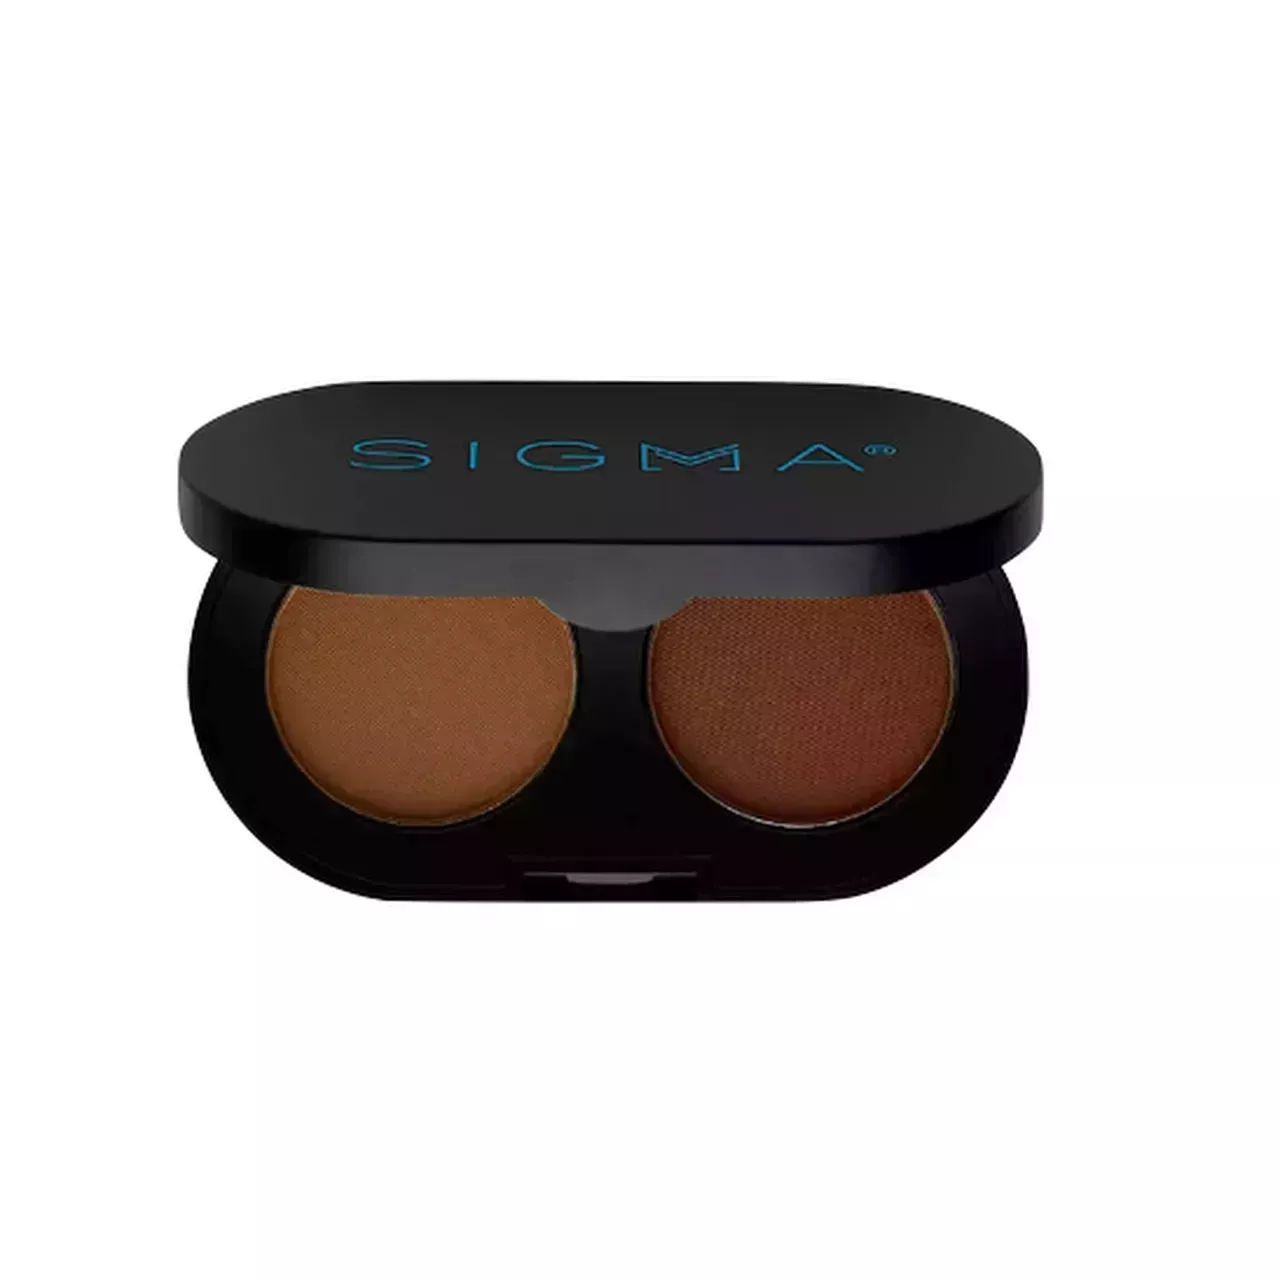 sigma color and shape brow powder duo on a white background